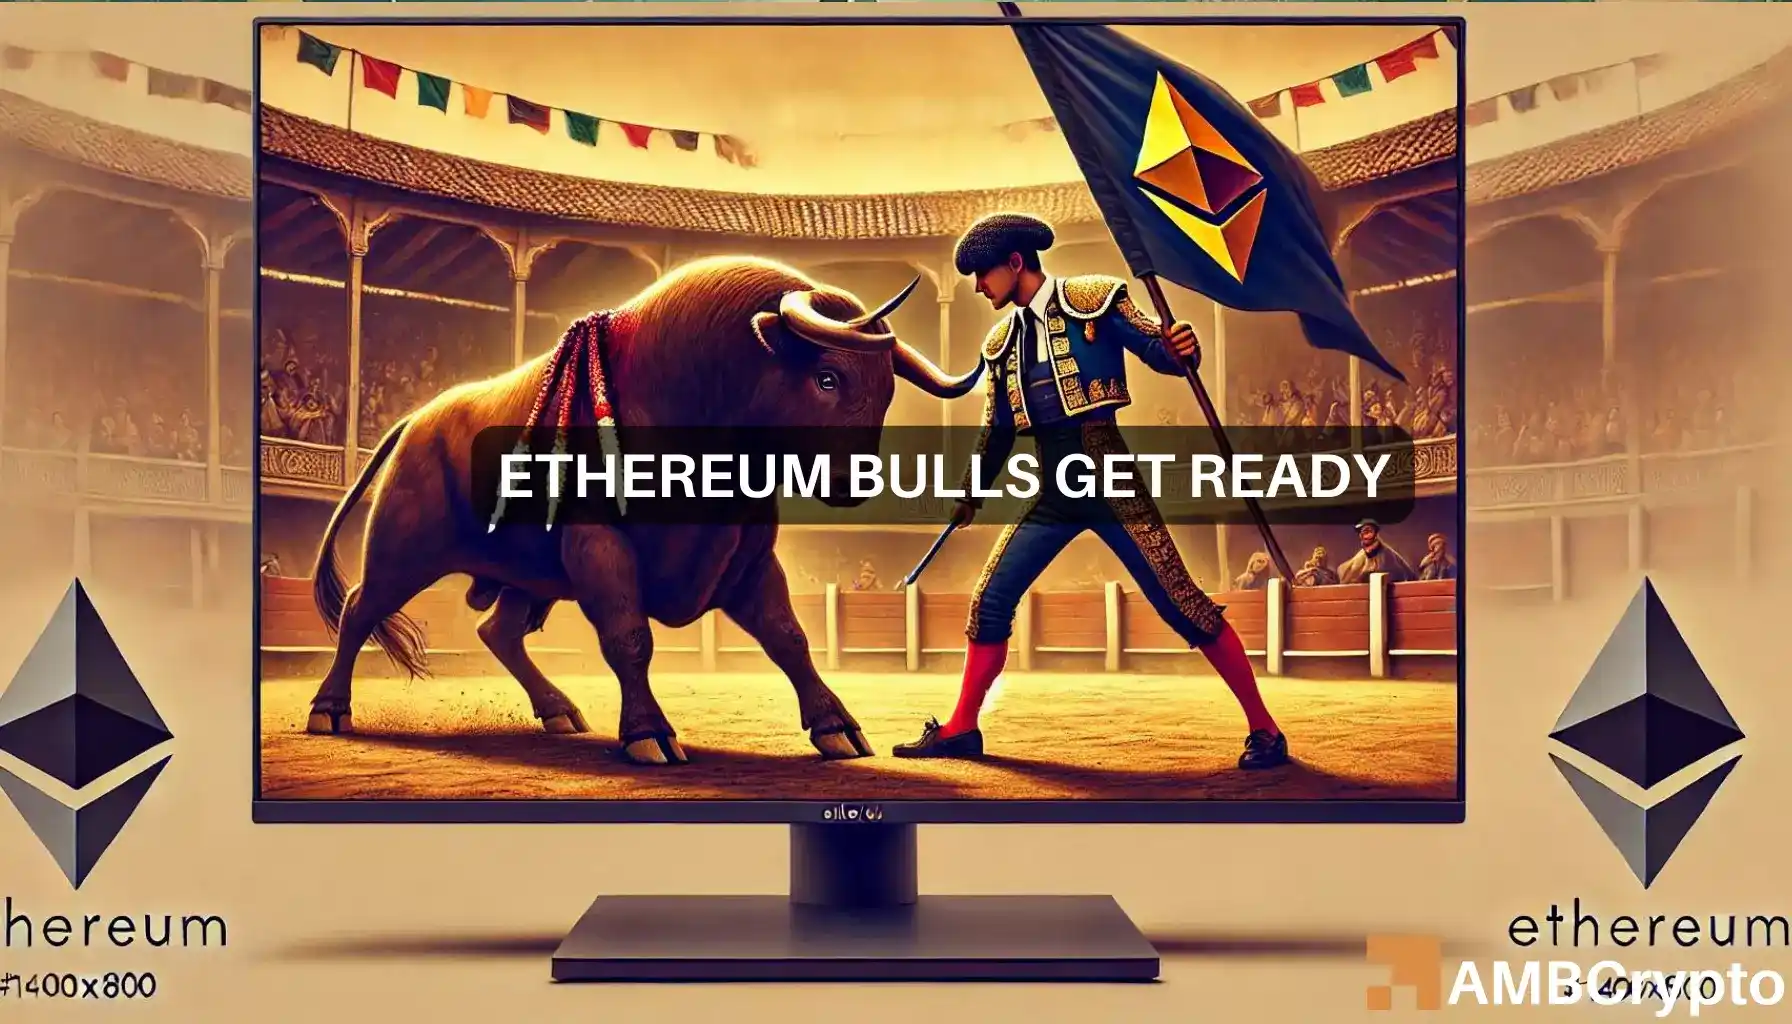 Ethereum’s bull run: Traders show confidence as ETH’s price climbs